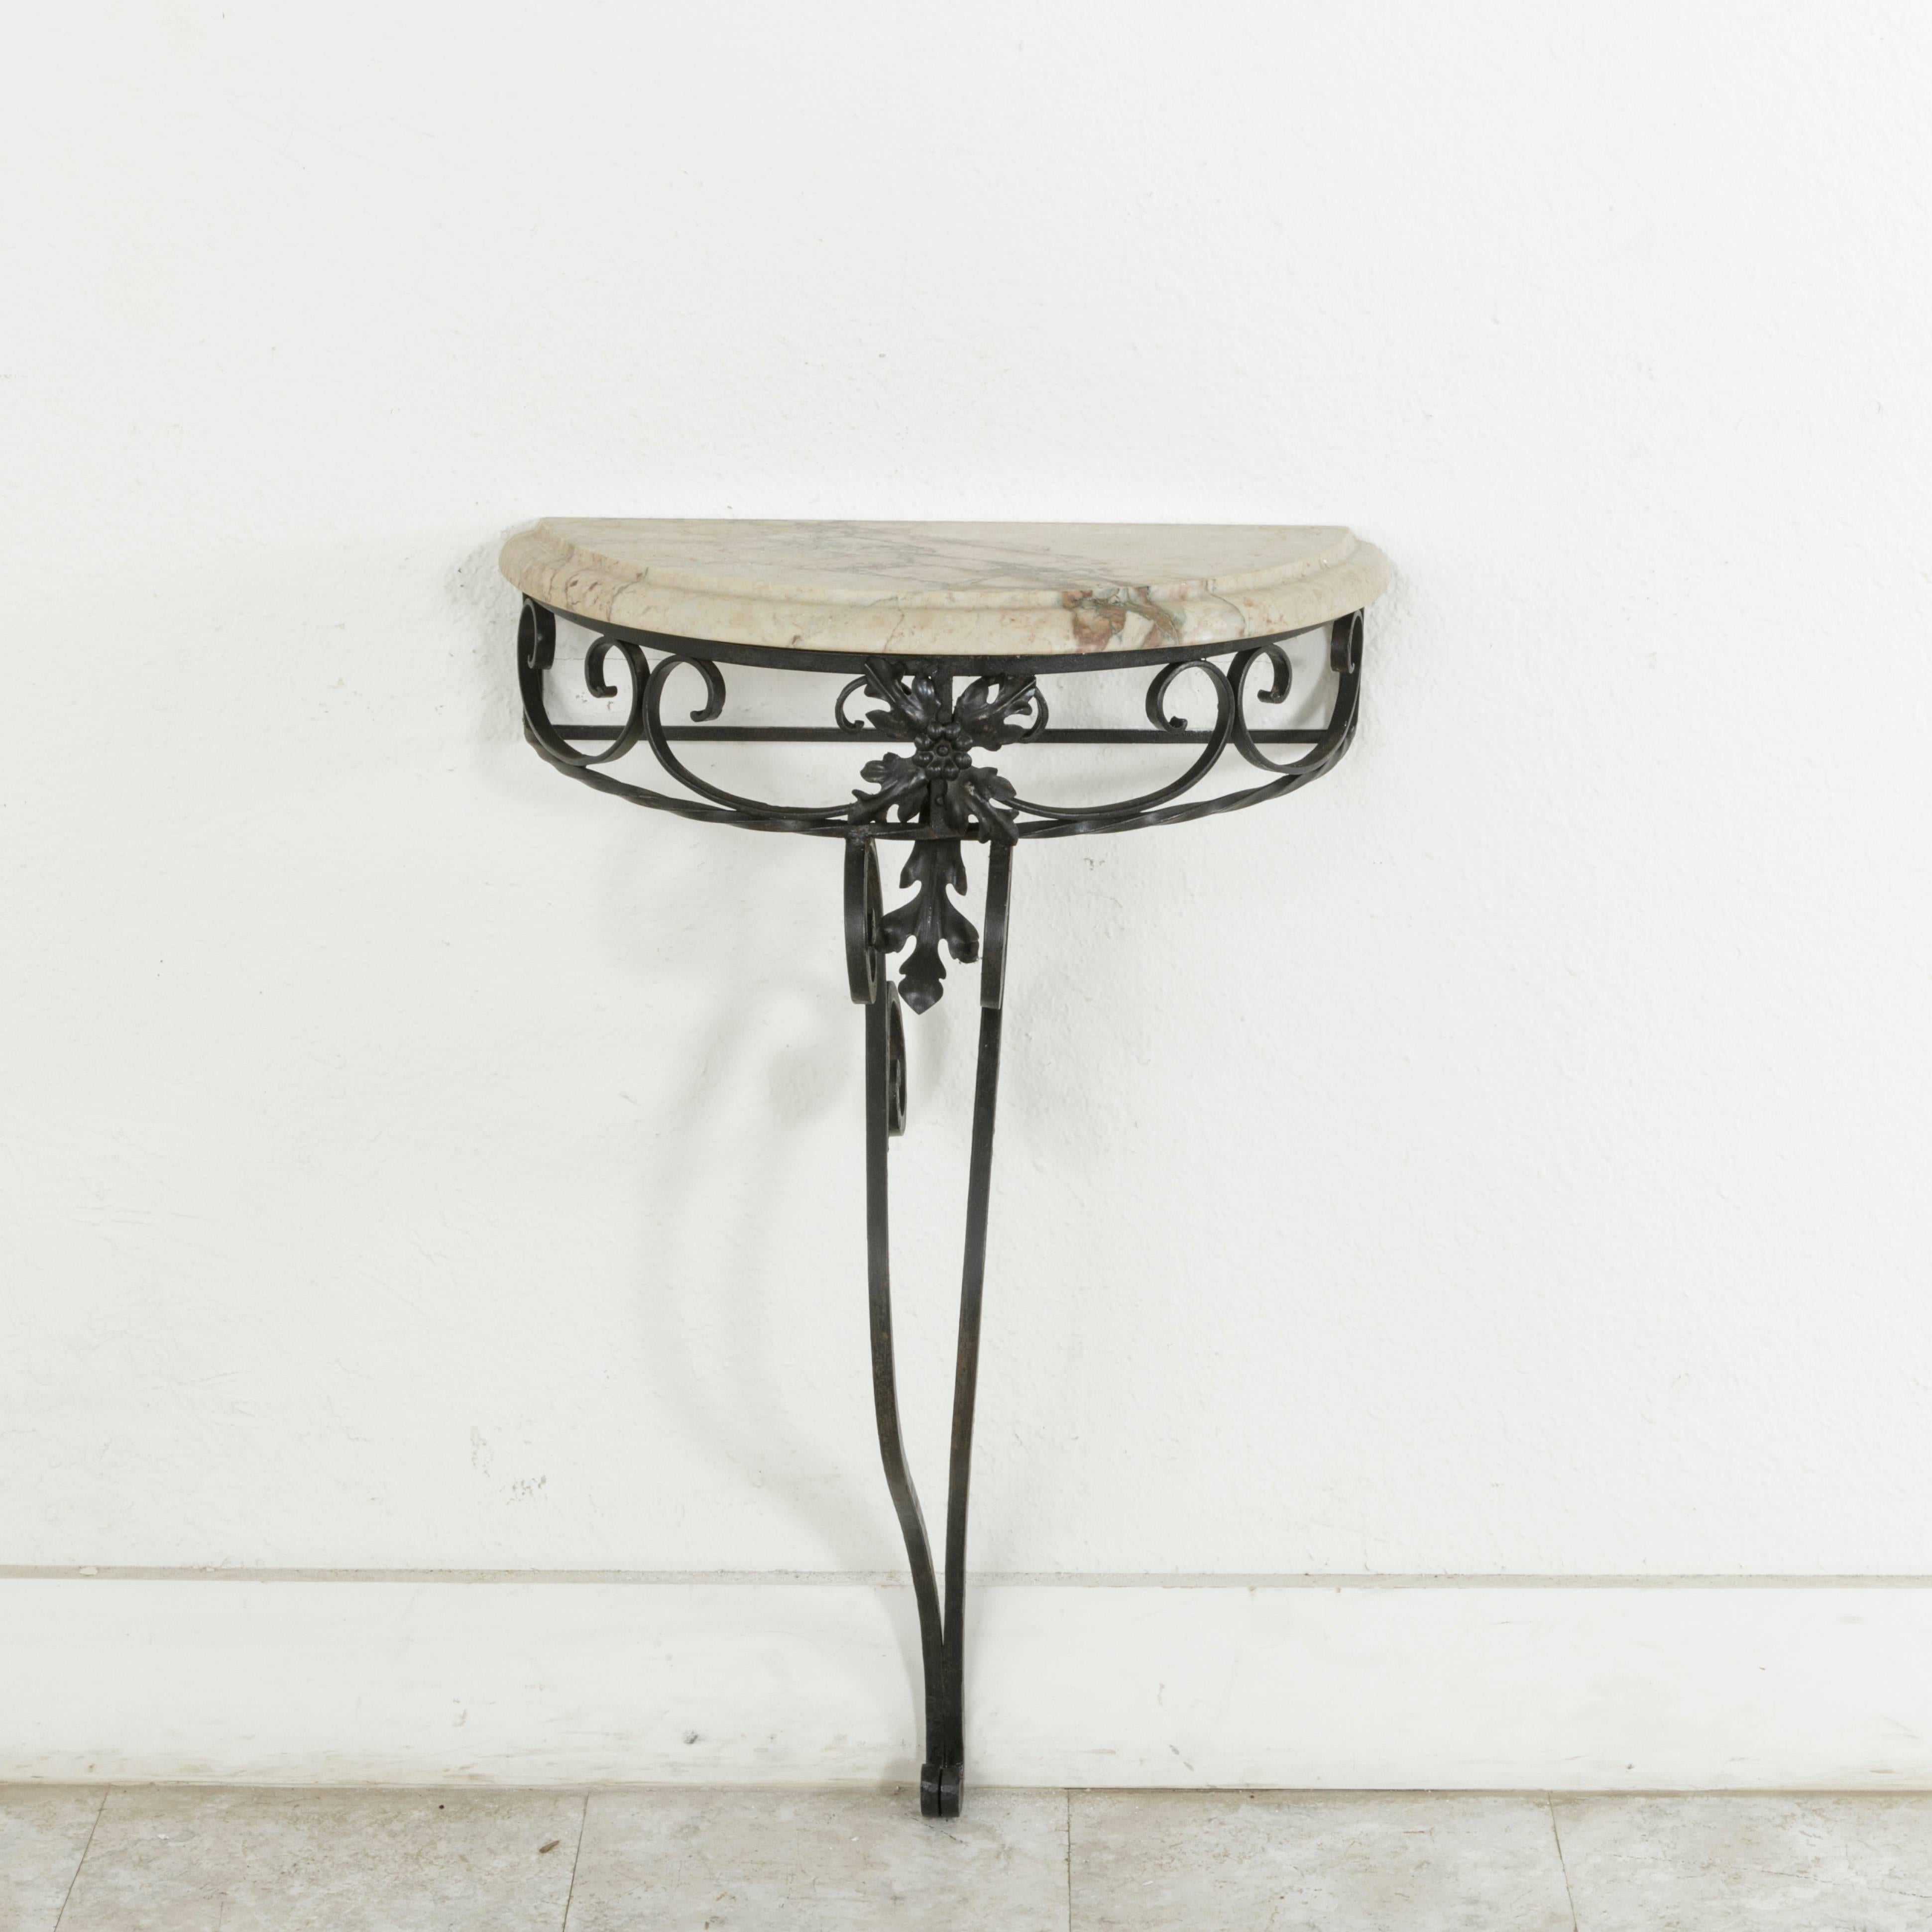 This small-scale mid-20th century French iron demilune console table features a central scrolled leg crowned with stylized acanthus leaves. A bevelled marble top completes the look. Mounted against a wall, this console table would be ideal in a